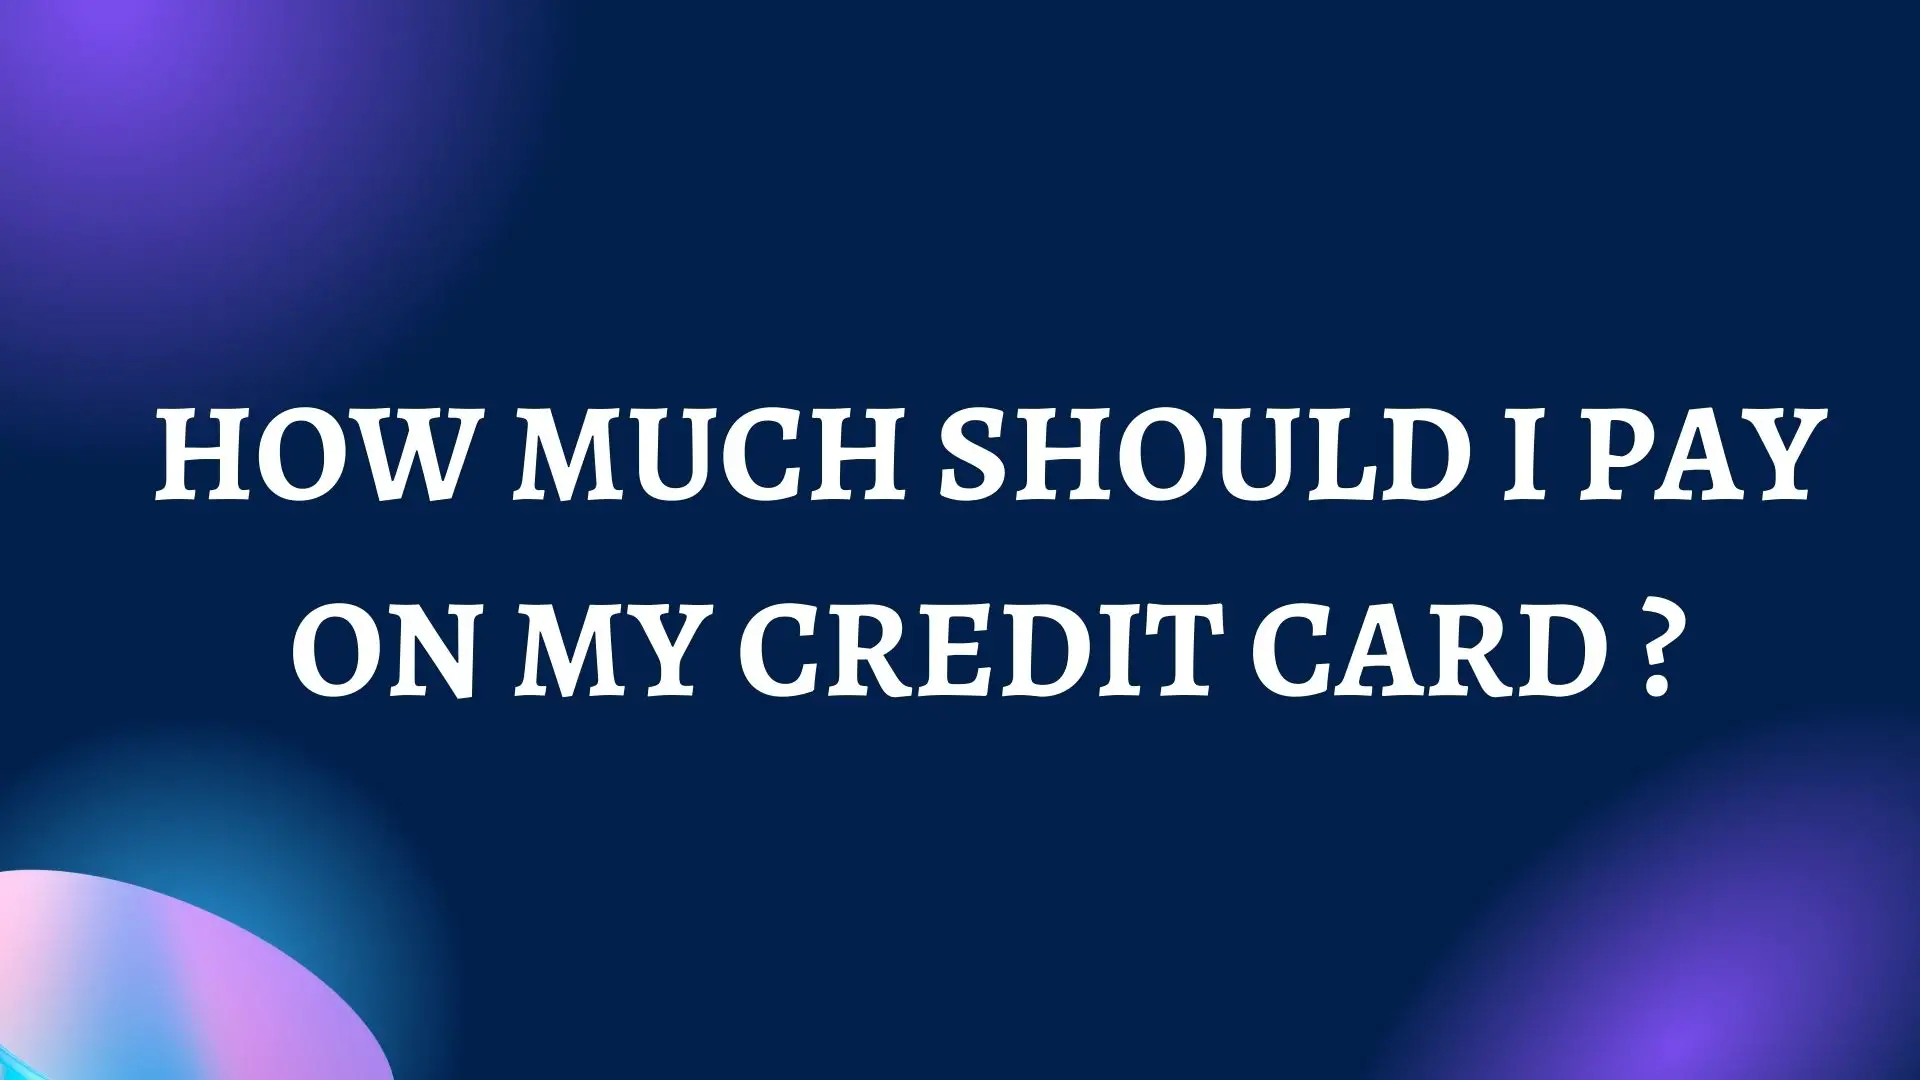 HOW MUCH SHOULD I PAY ON MY CREDIT CARD?